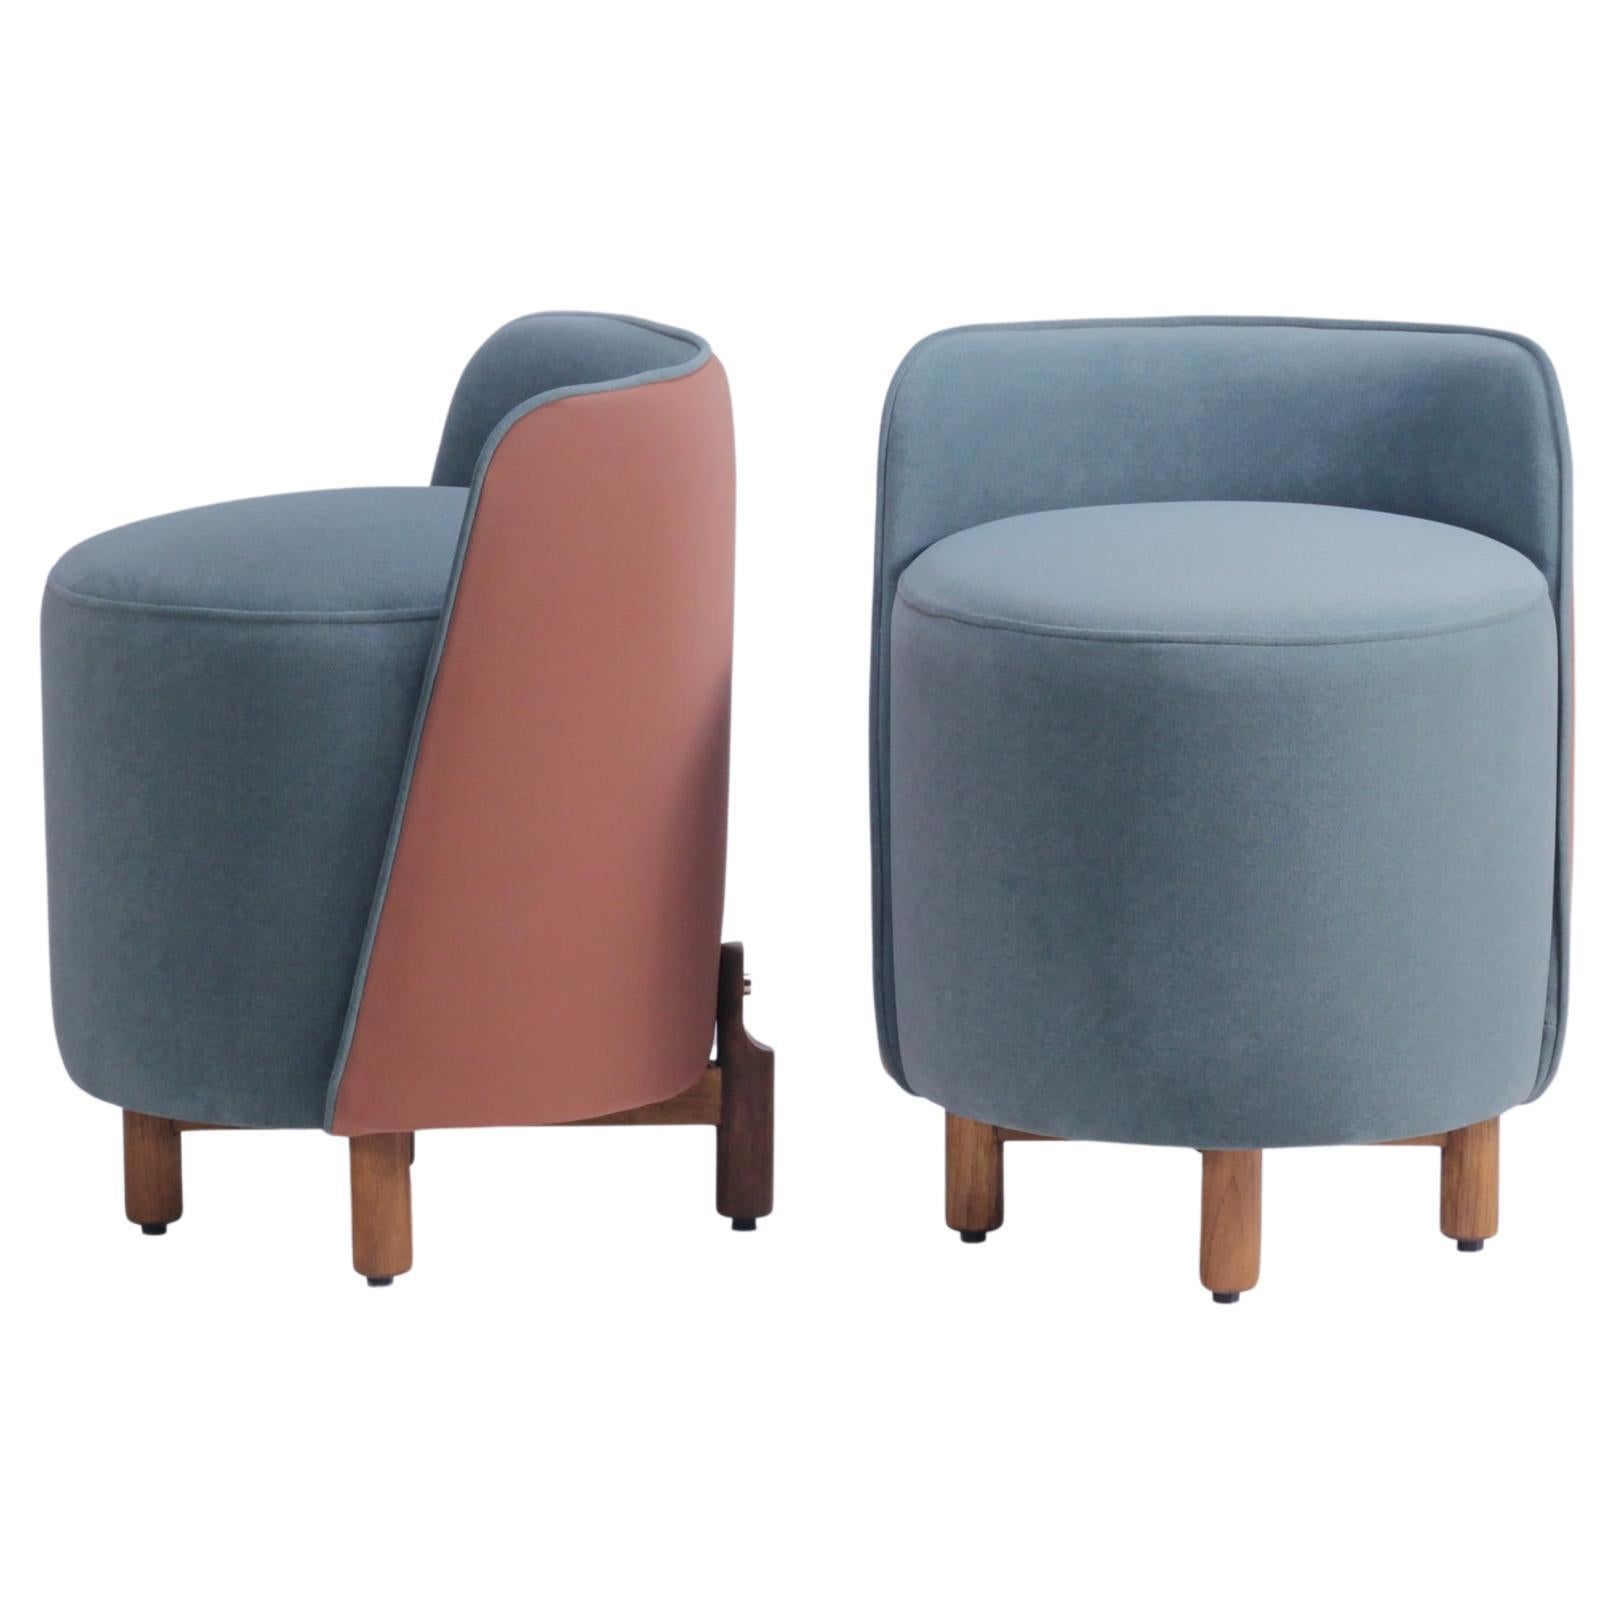 Set of 2 Modern Pouffe Seat with Backrest, Solid Wood Legs and Brass For Sale